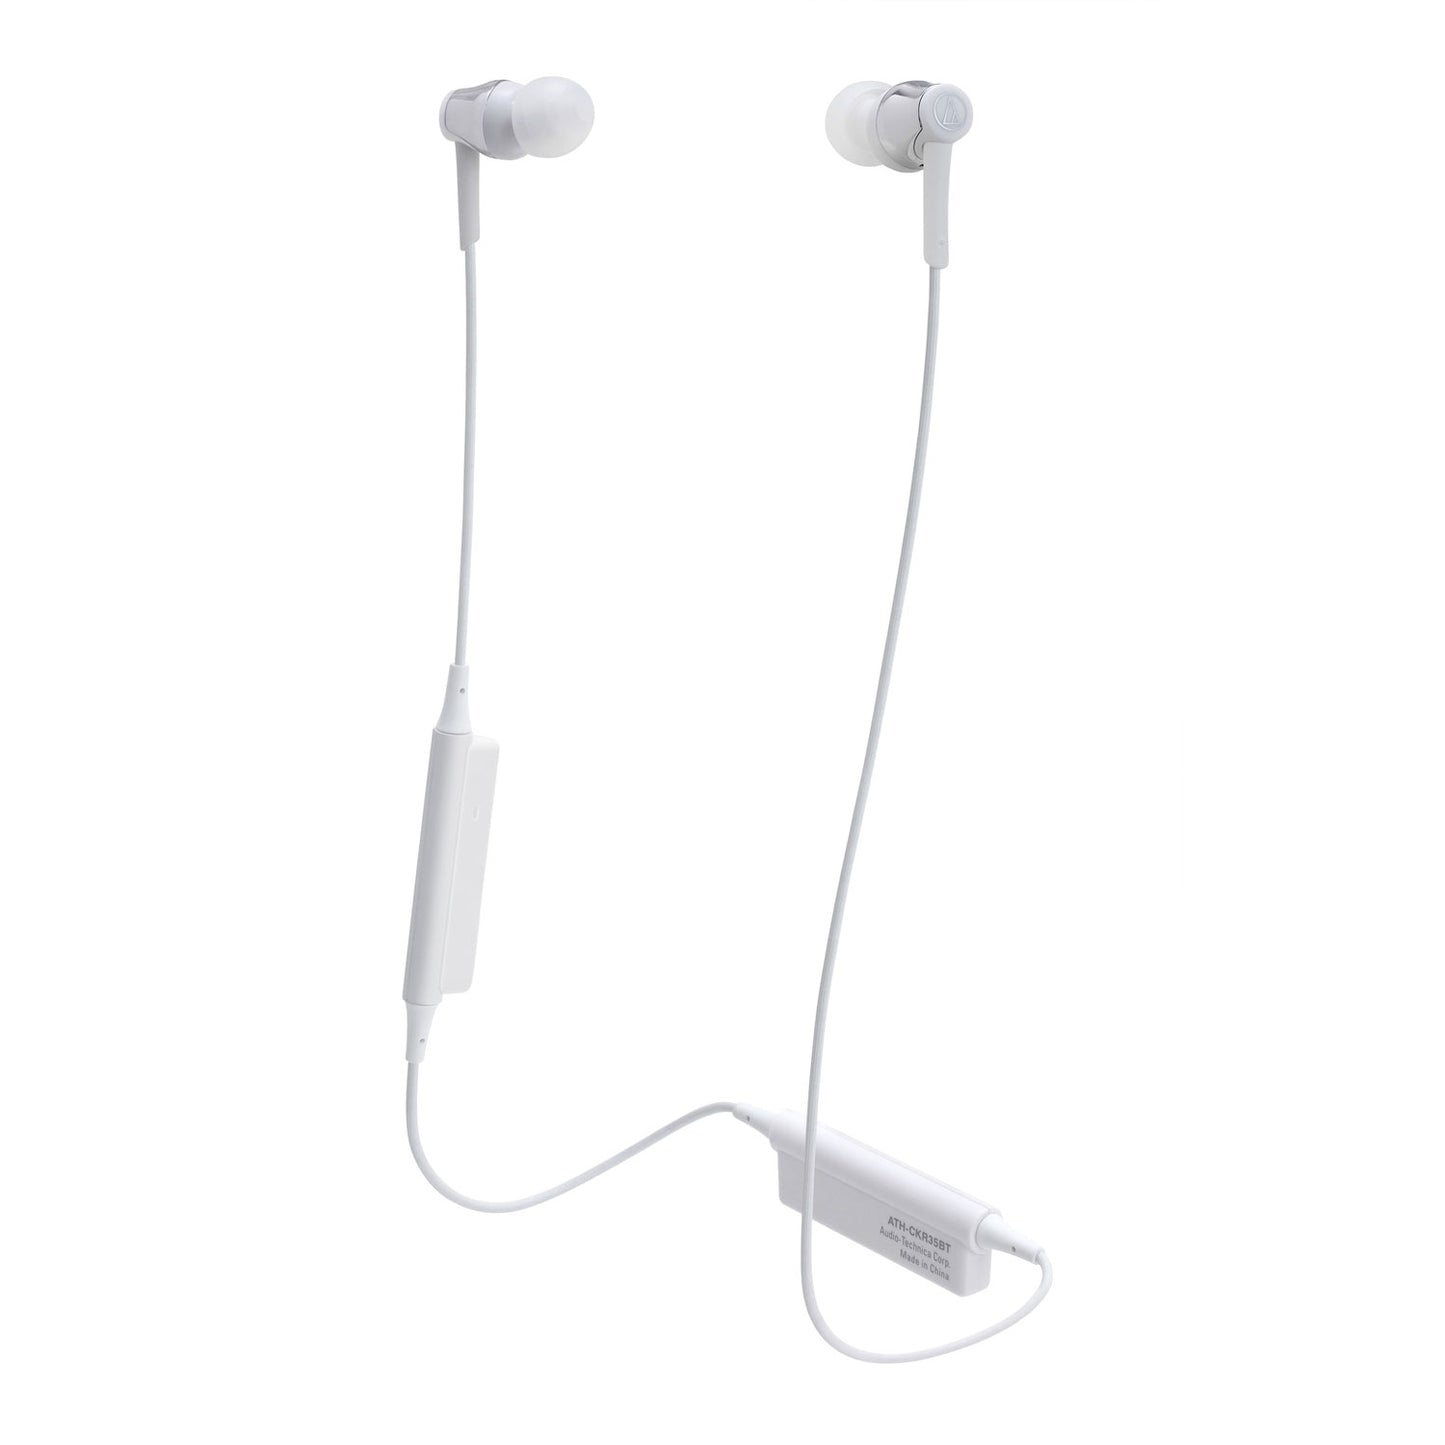 Audio-Technica ATH-CKR35BT Sound Reality Wireless In-Ear Headphones - White